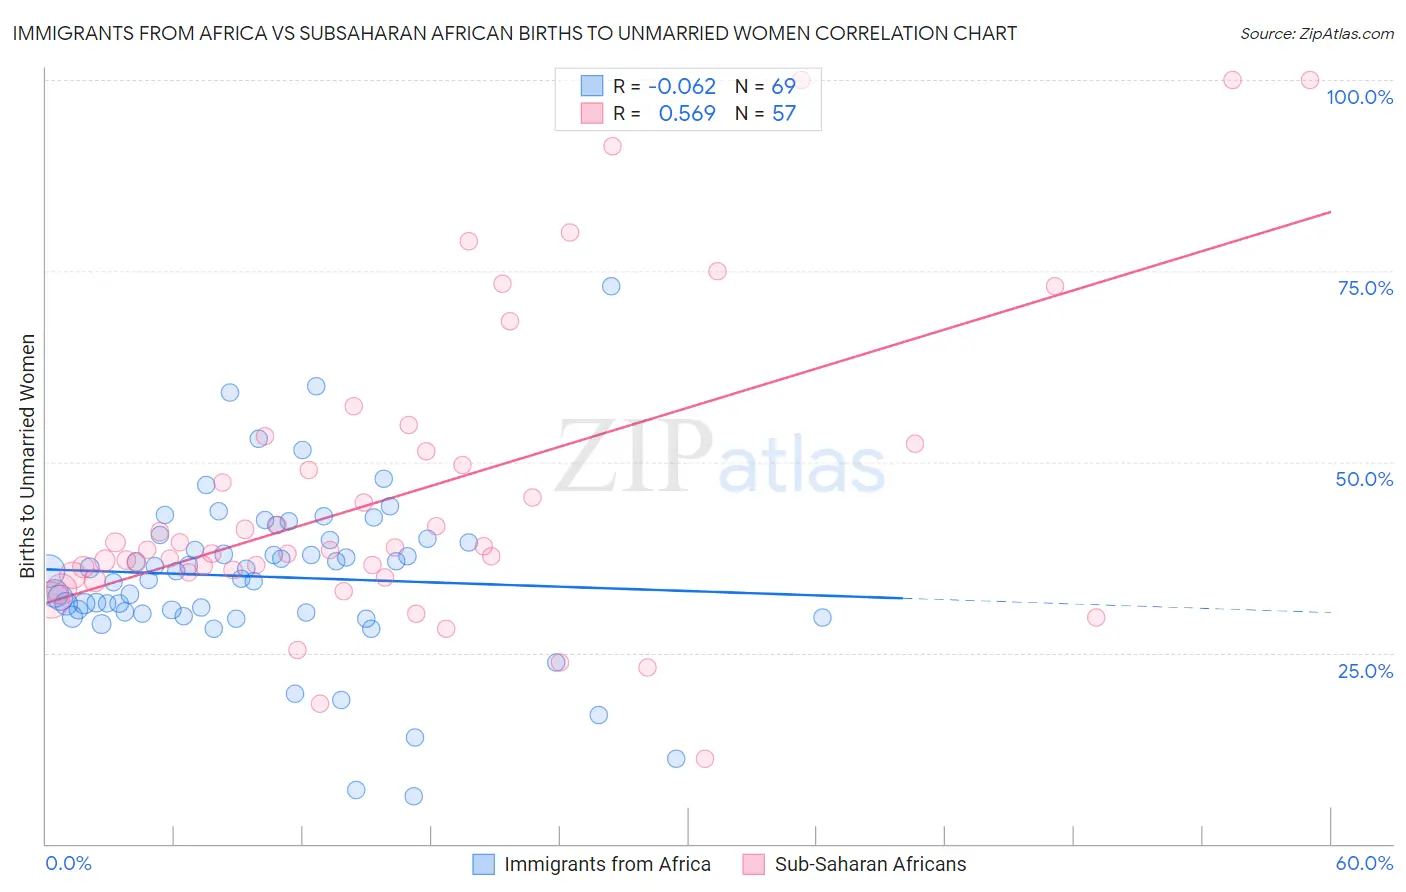 Immigrants from Africa vs Subsaharan African Births to Unmarried Women